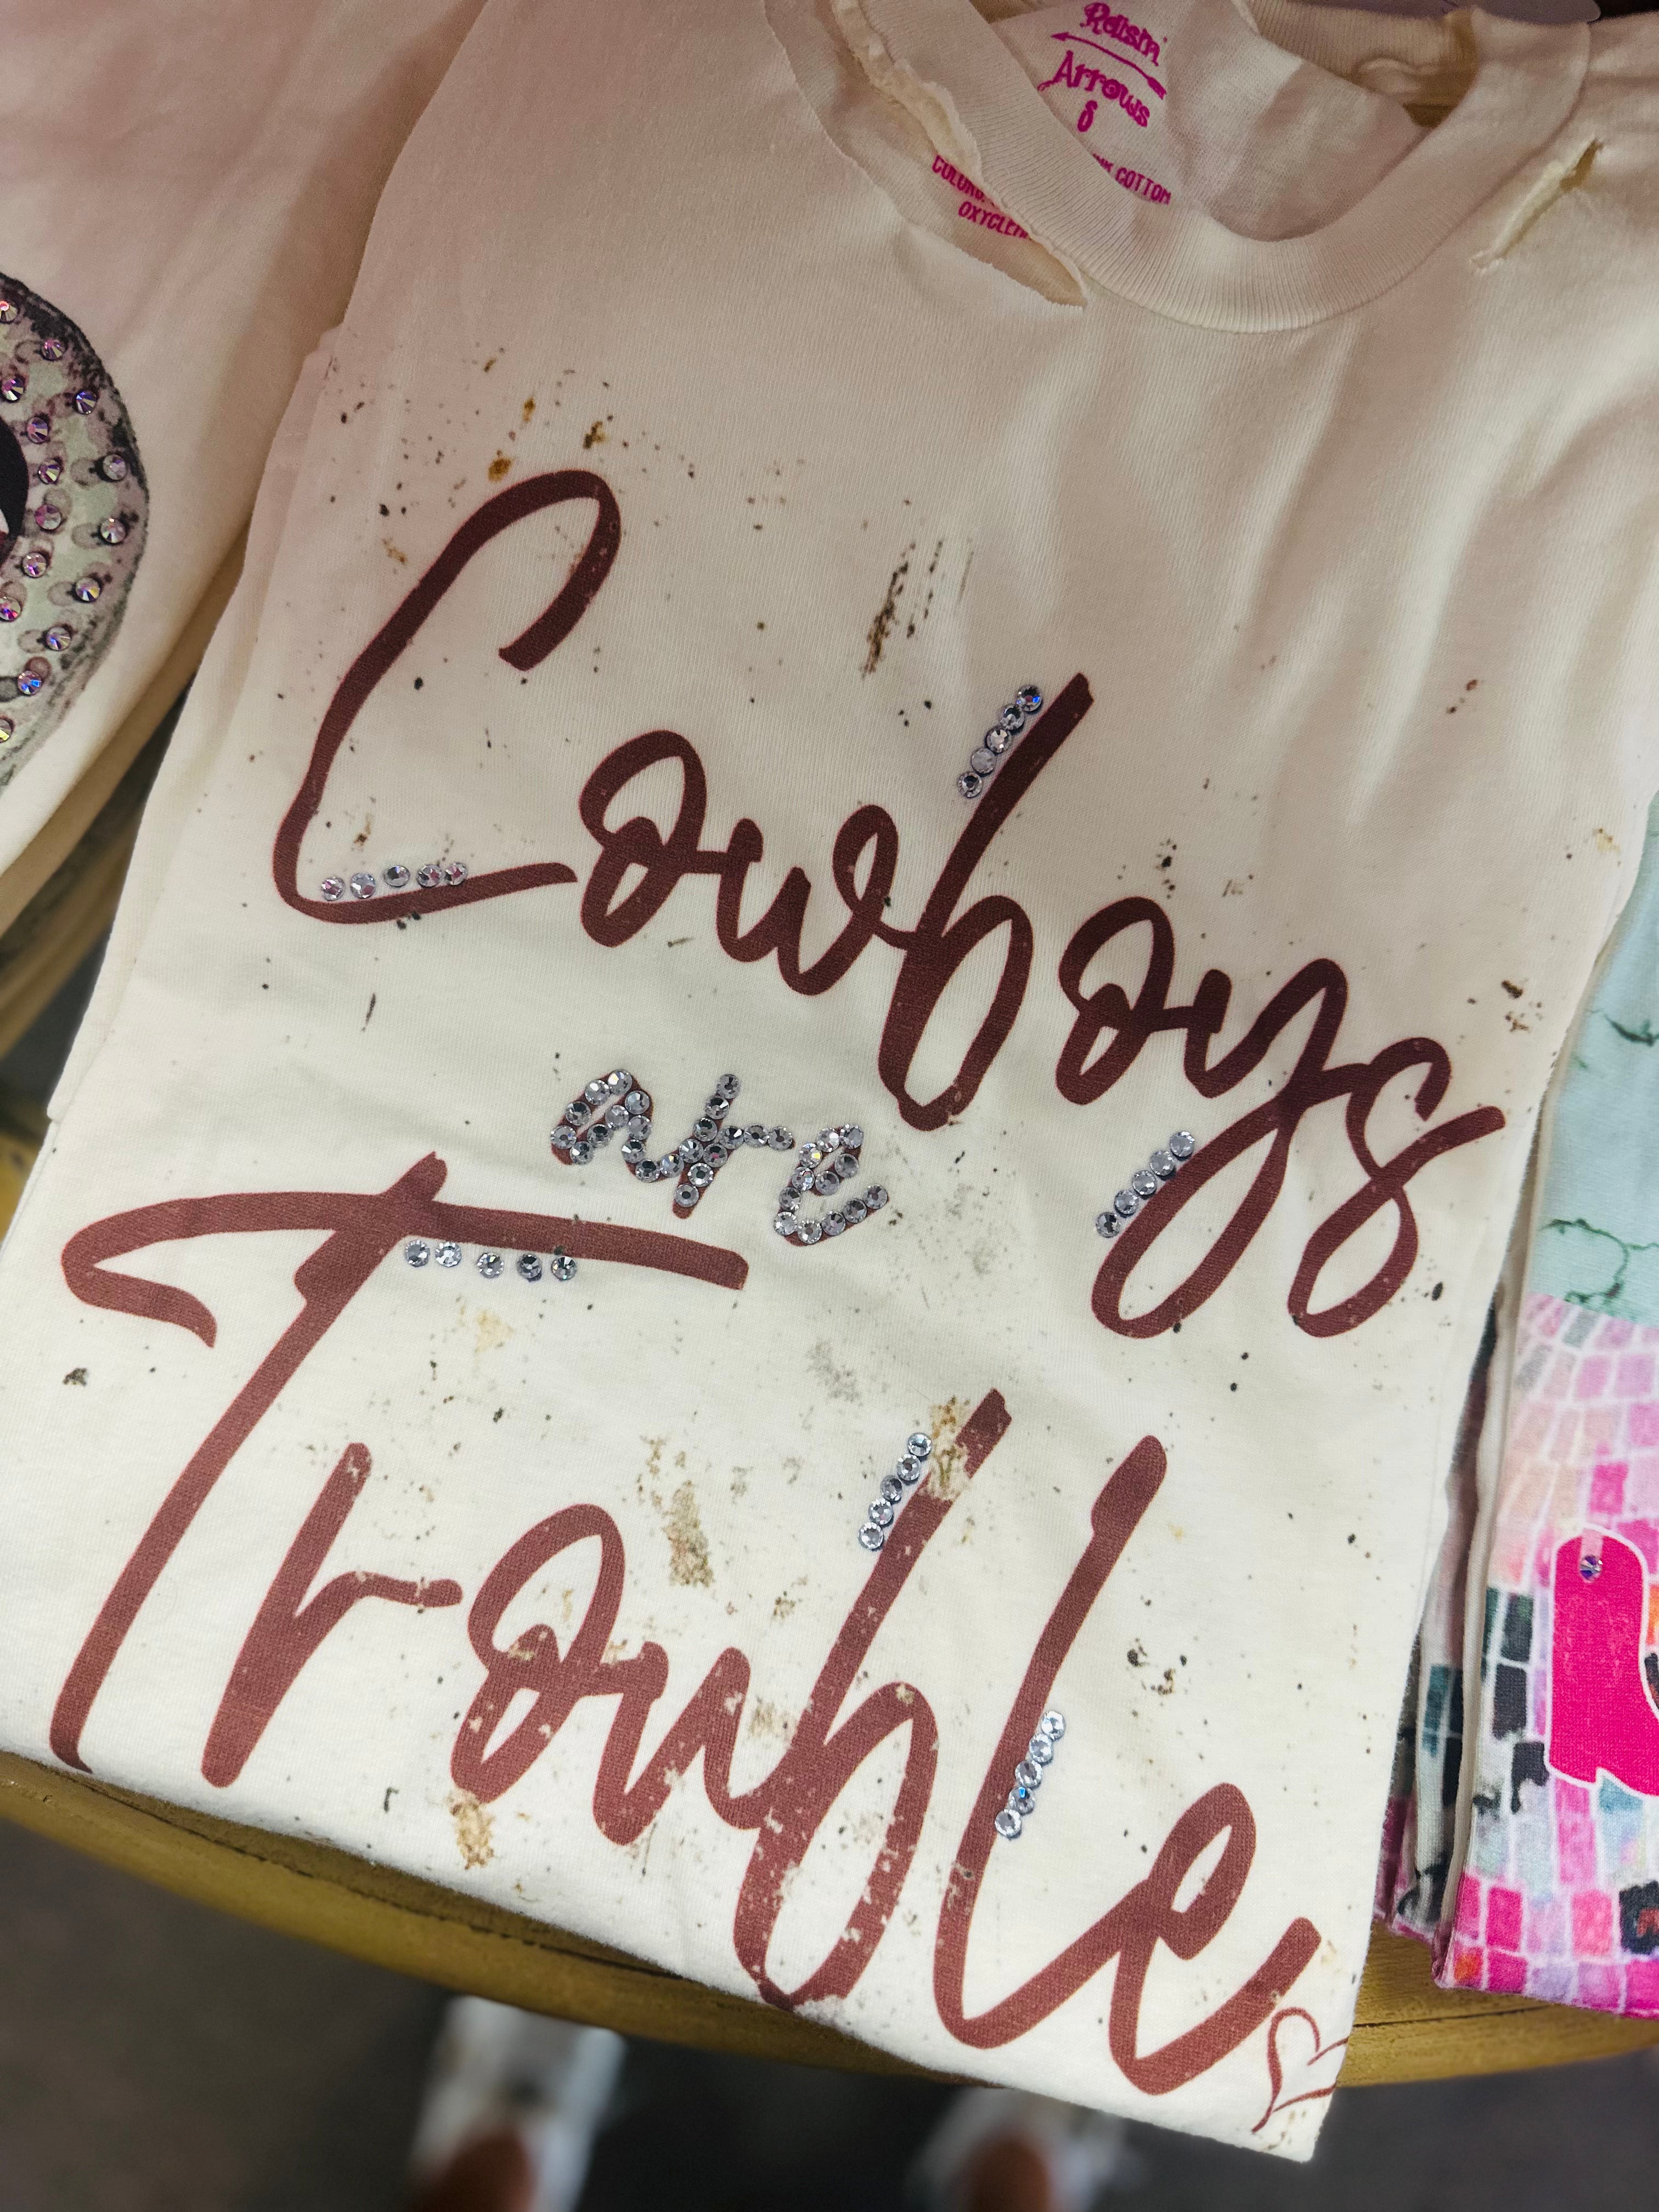 Cowboys Are Trouble T-Shirt – Stubbs Dept. Store